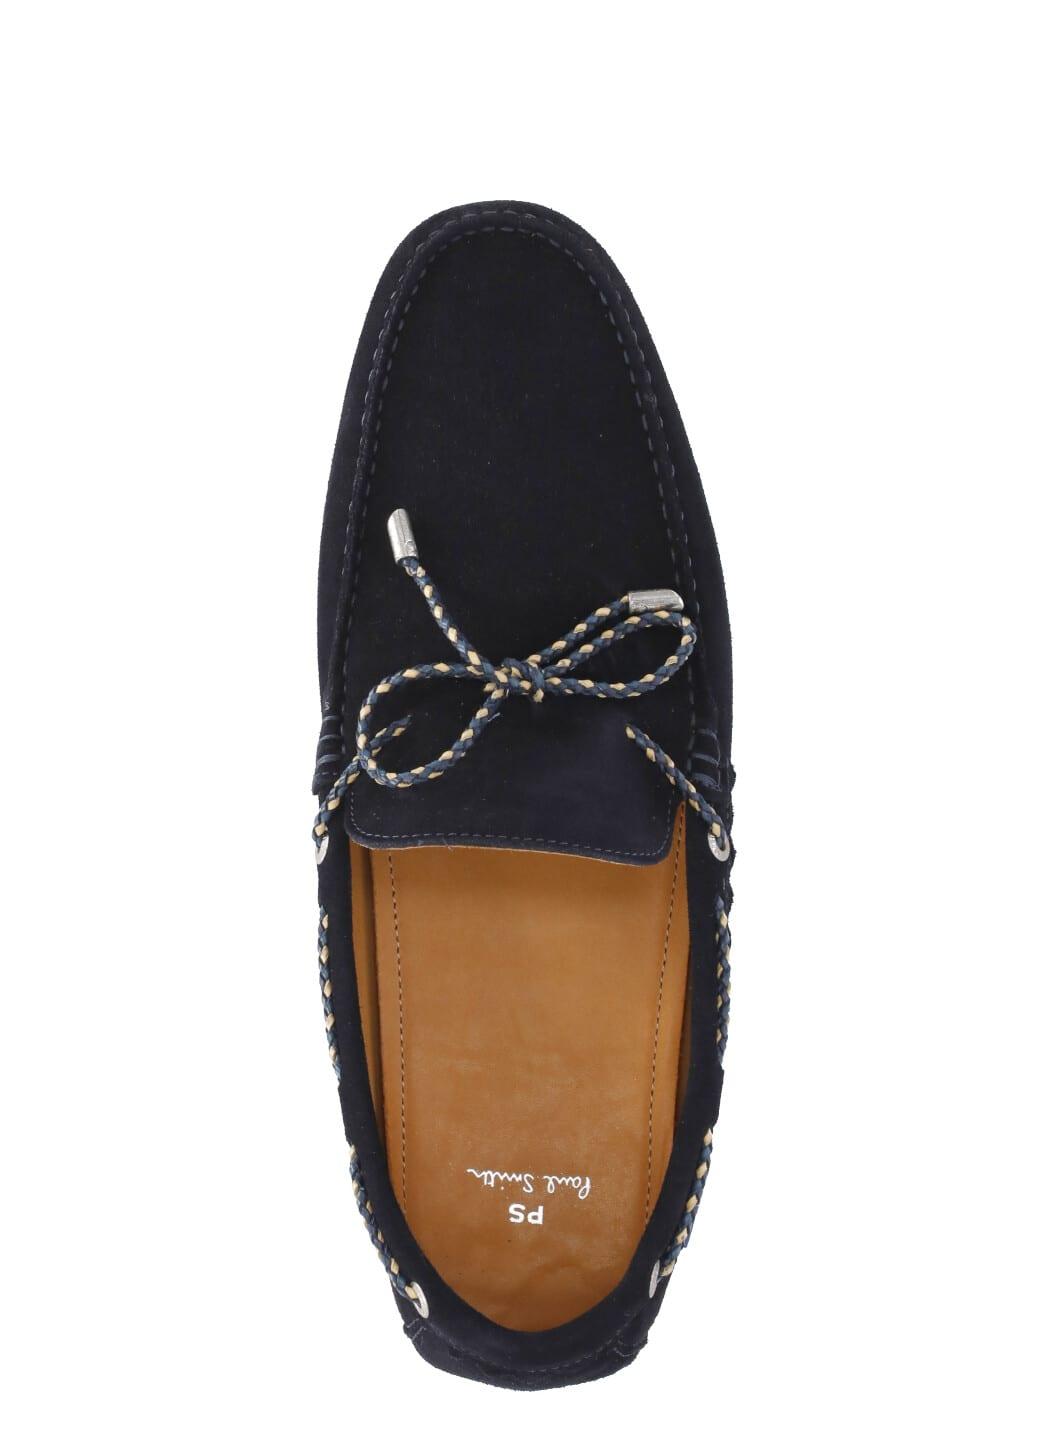 PS by Paul Smith Springfield Suede Leather Loafers in Black for Men | Lyst